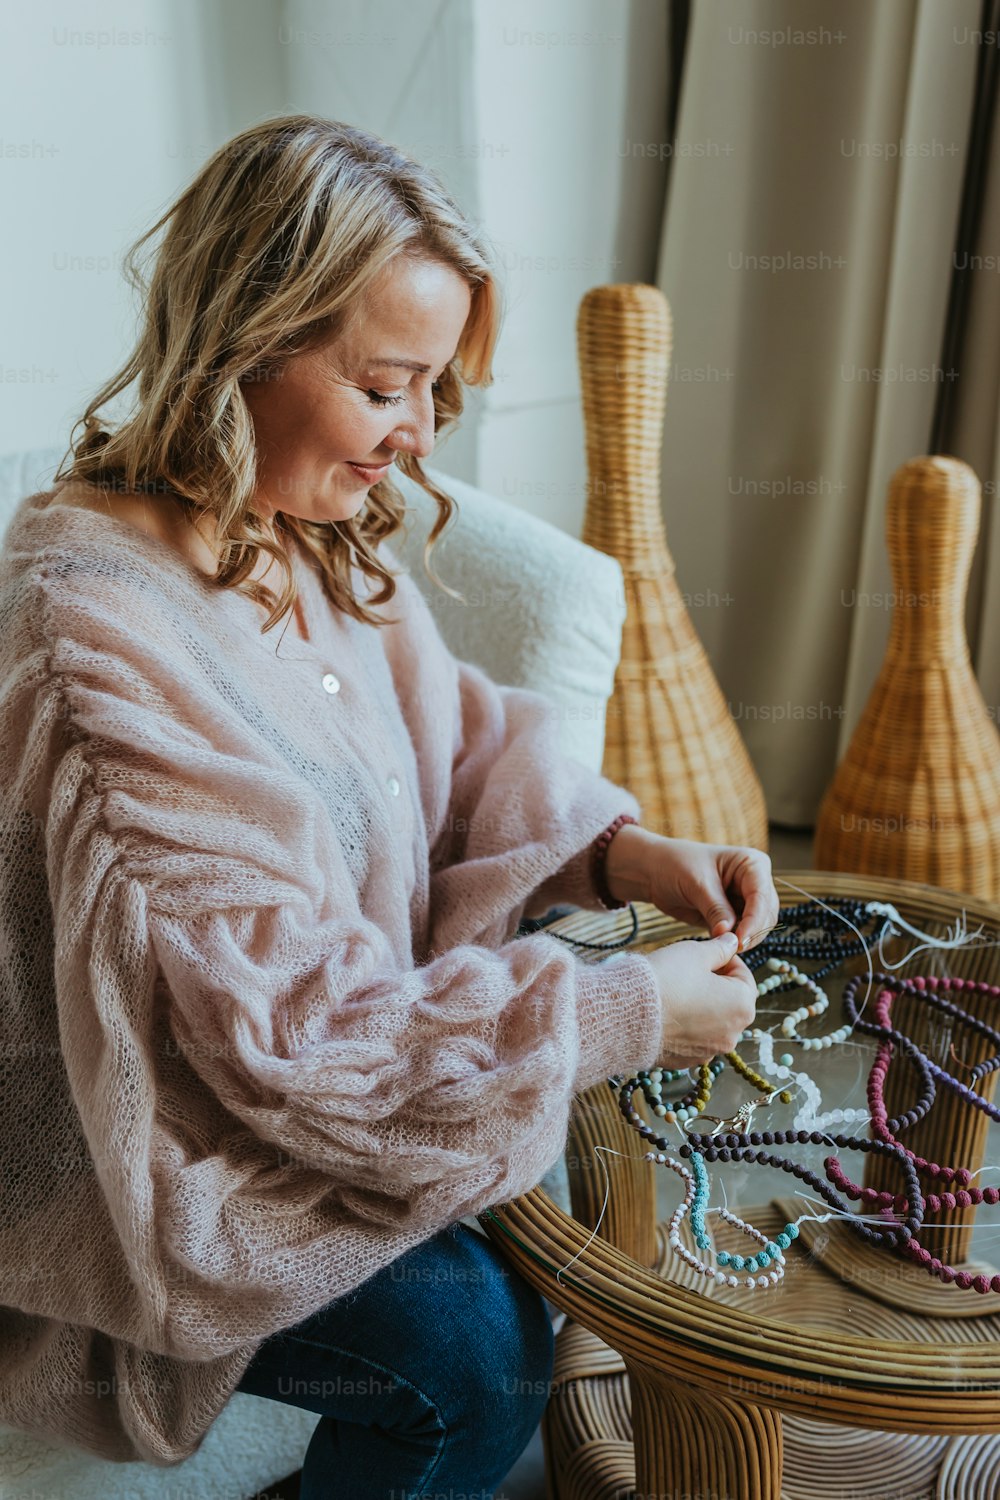 a woman sitting on a couch looking at a bunch of necklaces